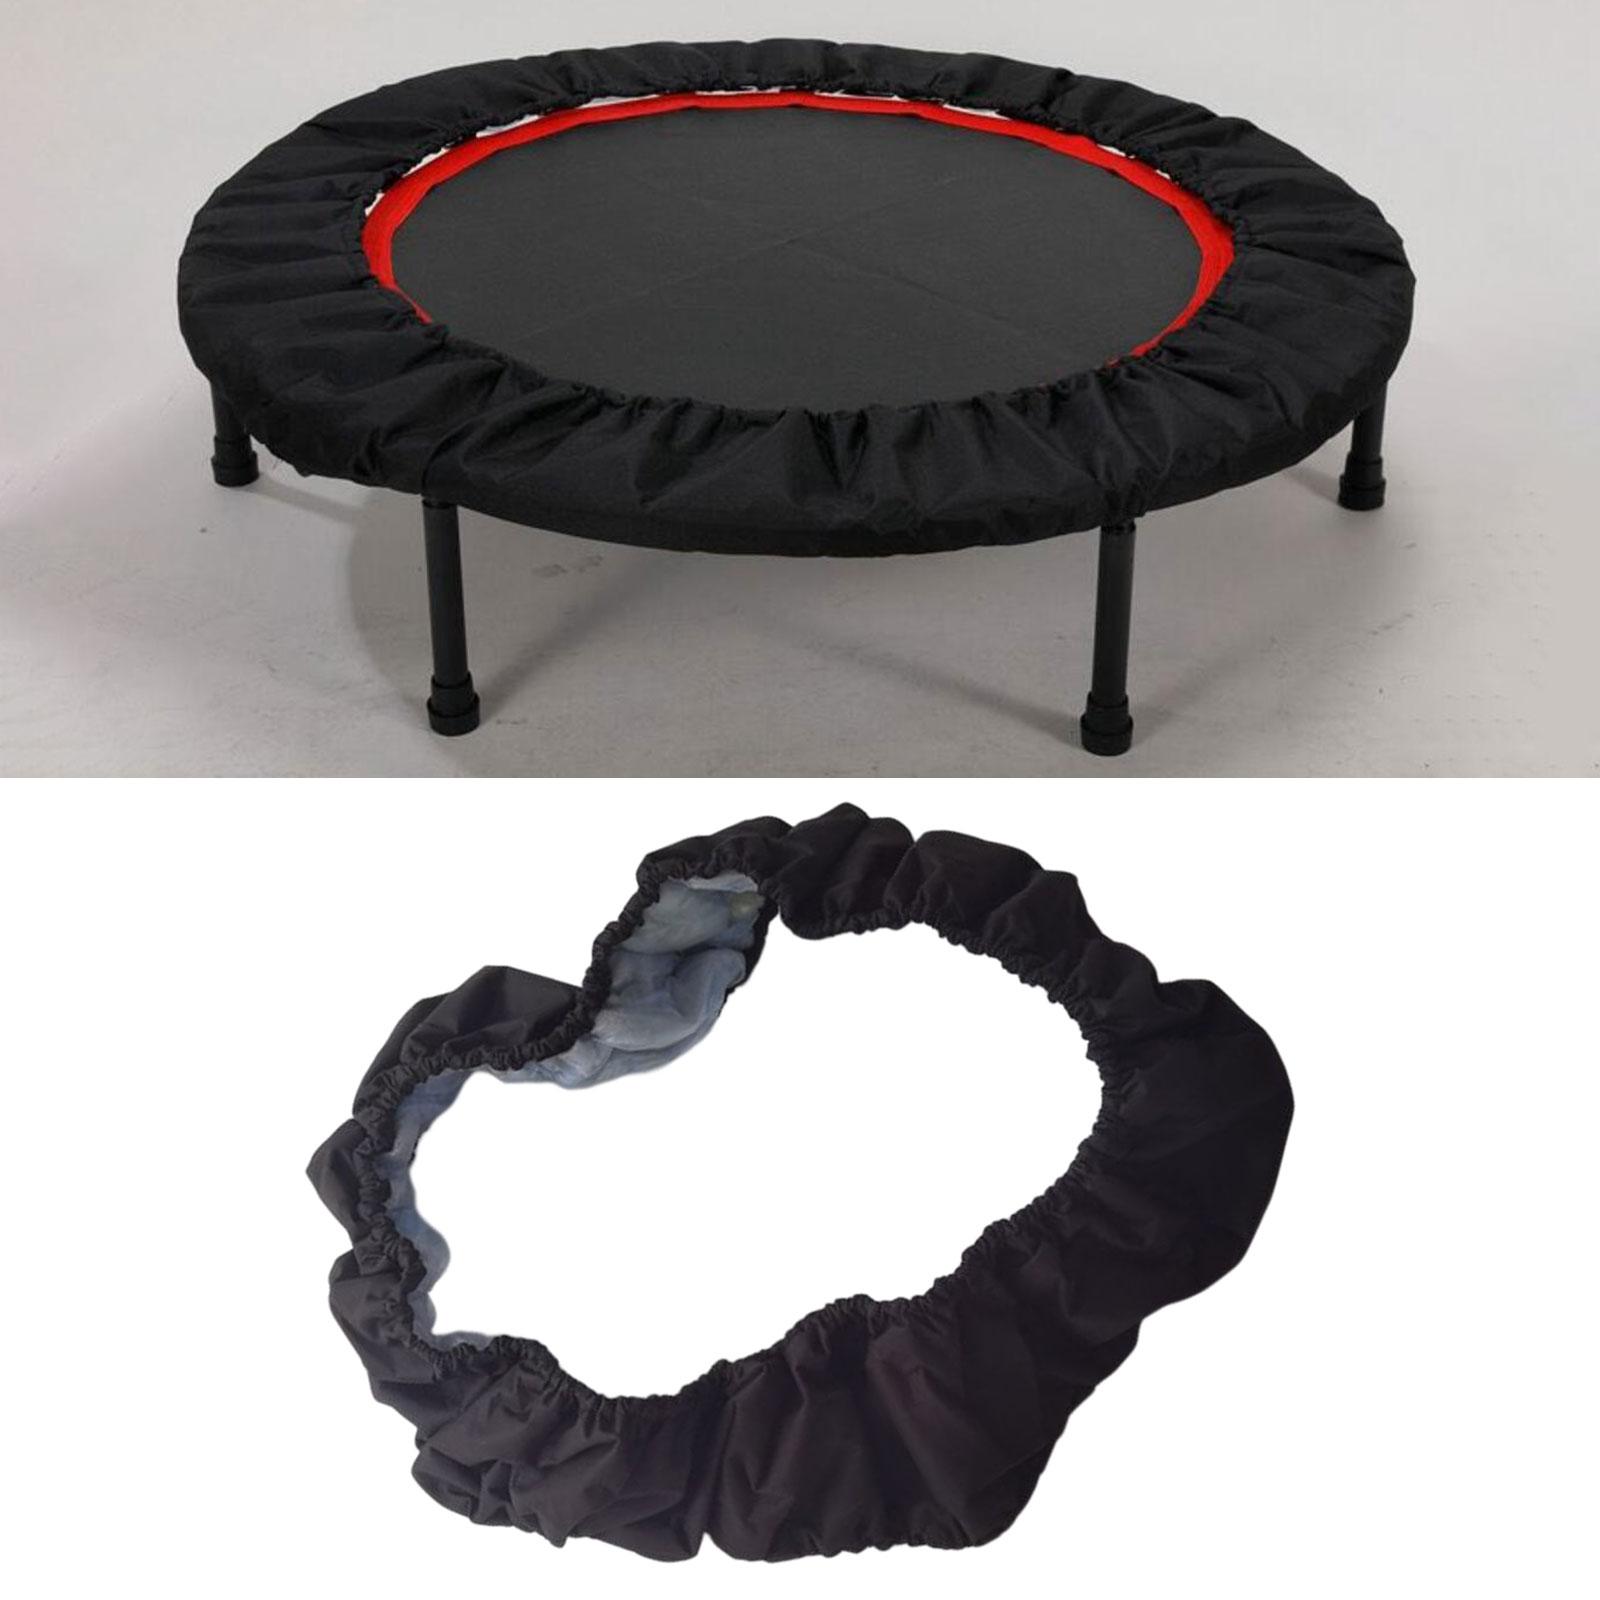 Trampoline Spring Cover Jumping Bed Cover Round Waterproof Easy to Install 48inch 8 Holes